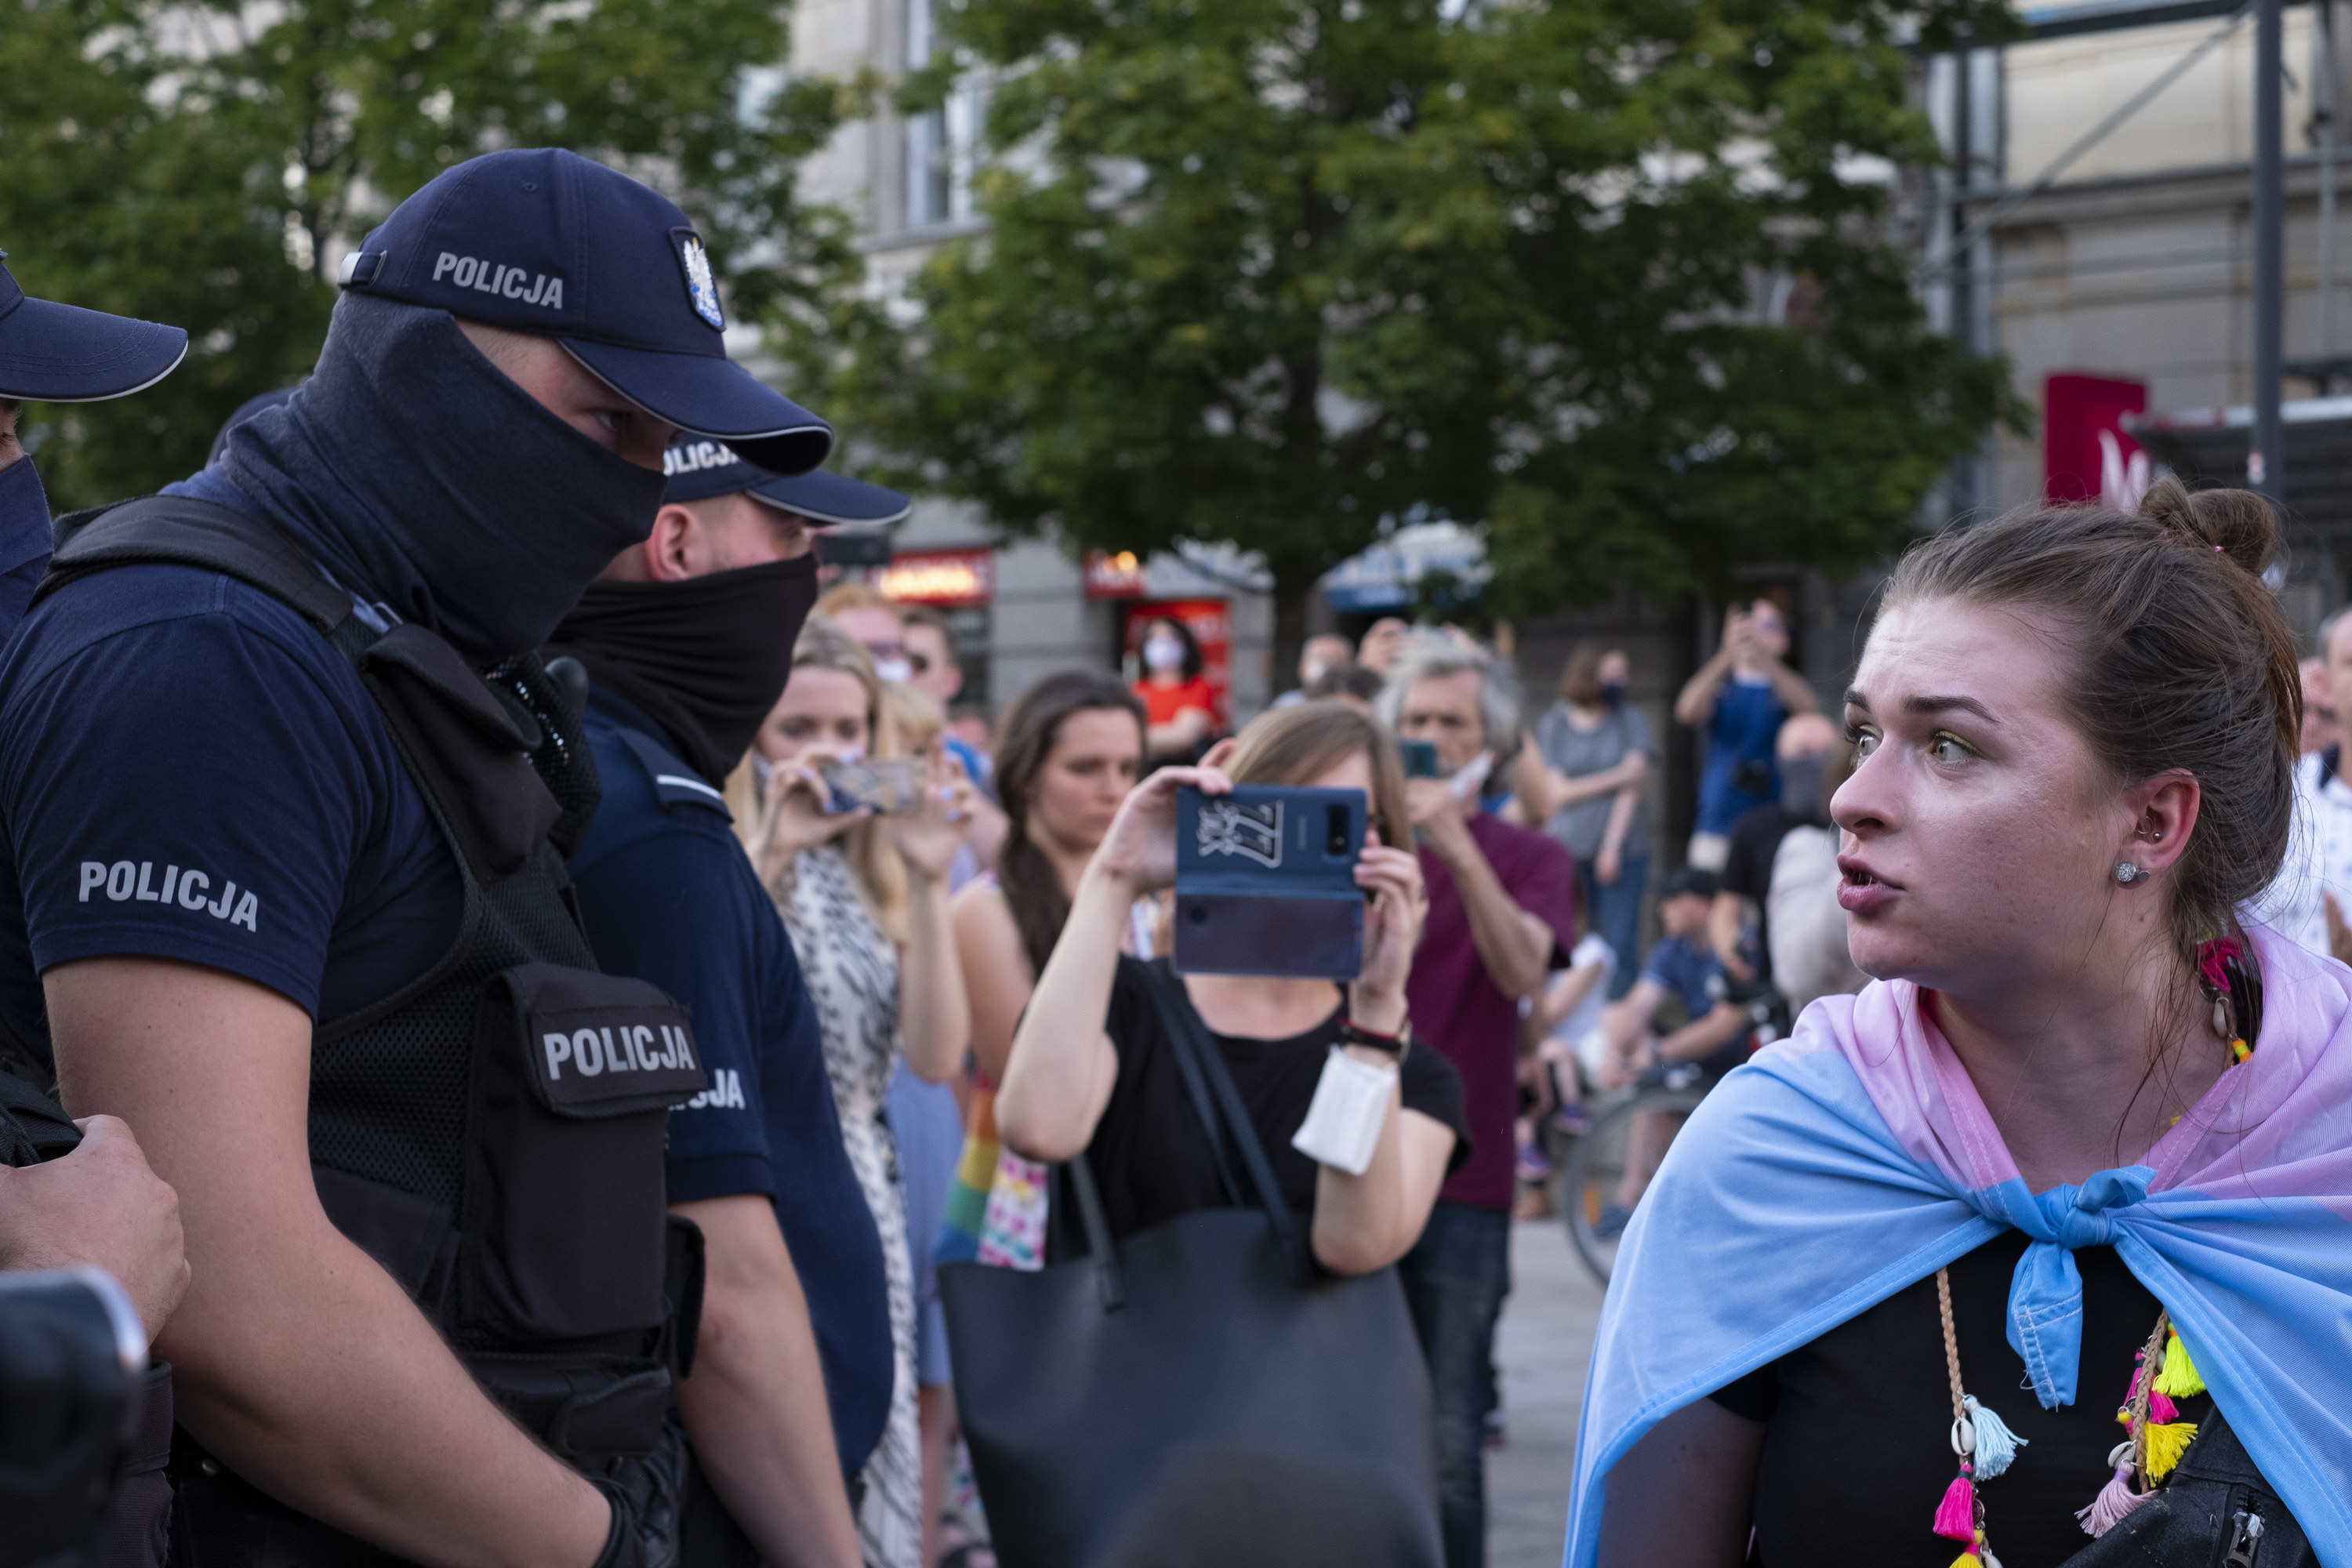 A protester talks to a line of police officers while onlookers capture it with their smartphones